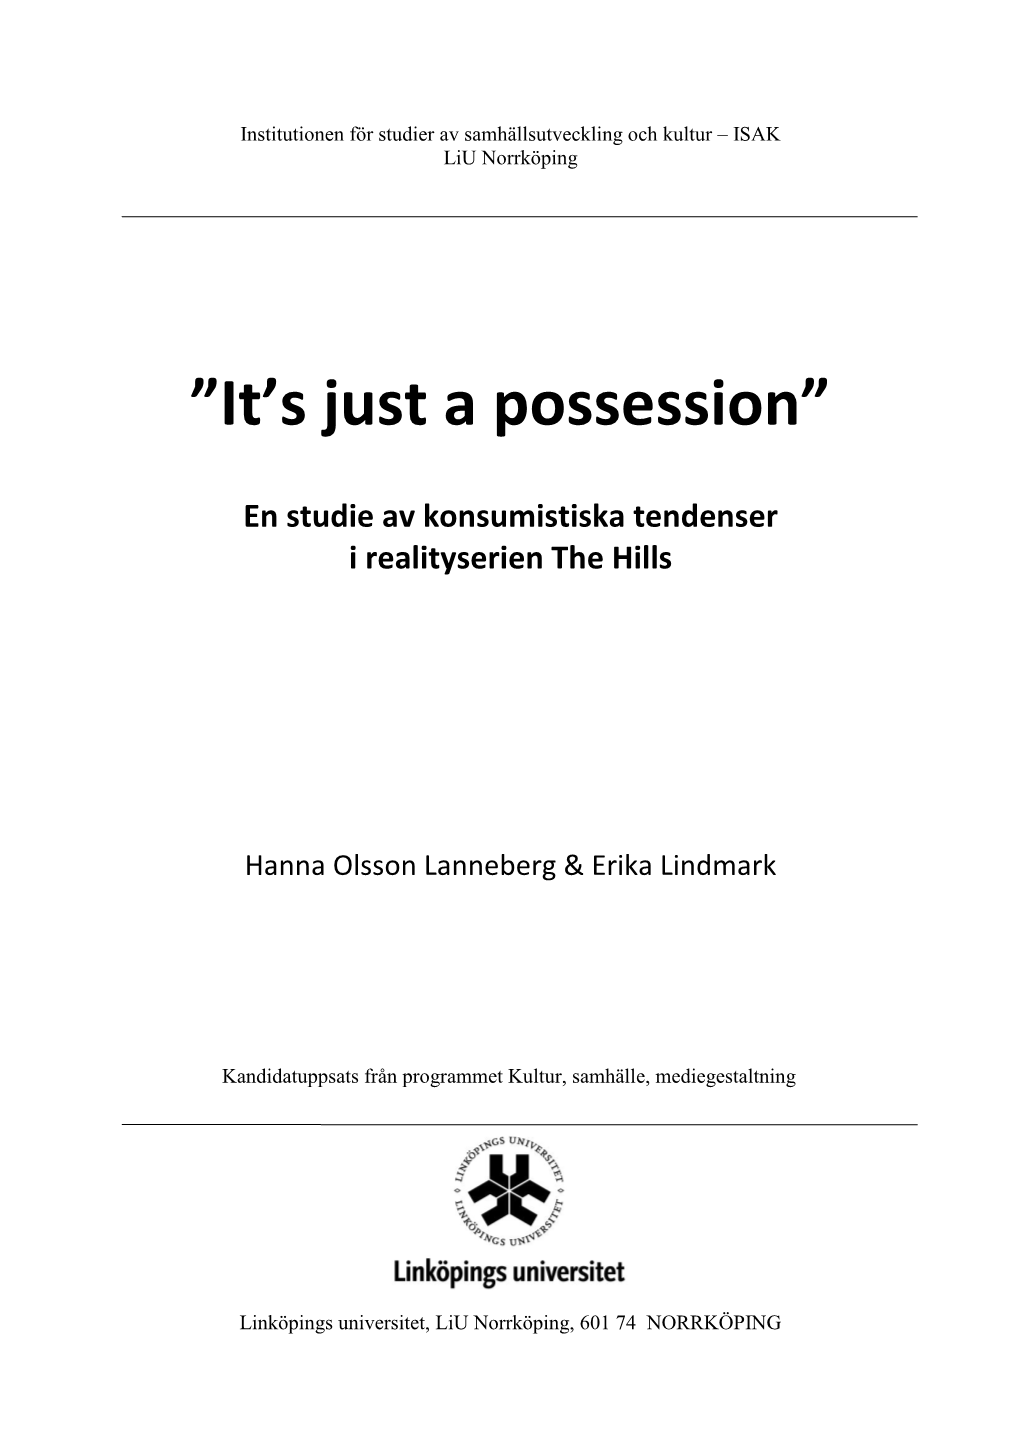 It's Just a Possession”